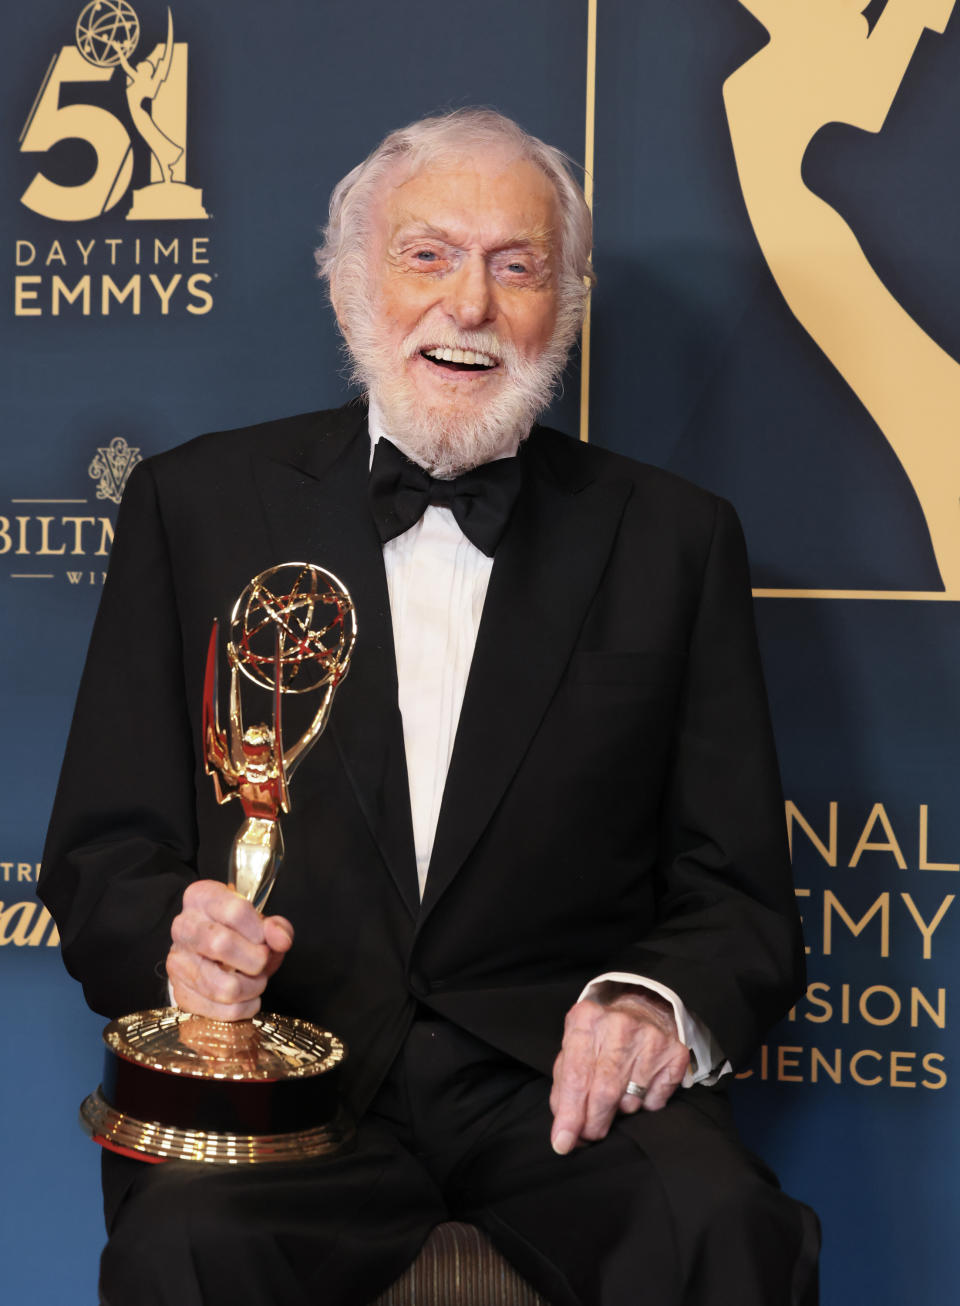 Dick Van Dyke poses at the 51st annual Daytime Emmys Awards